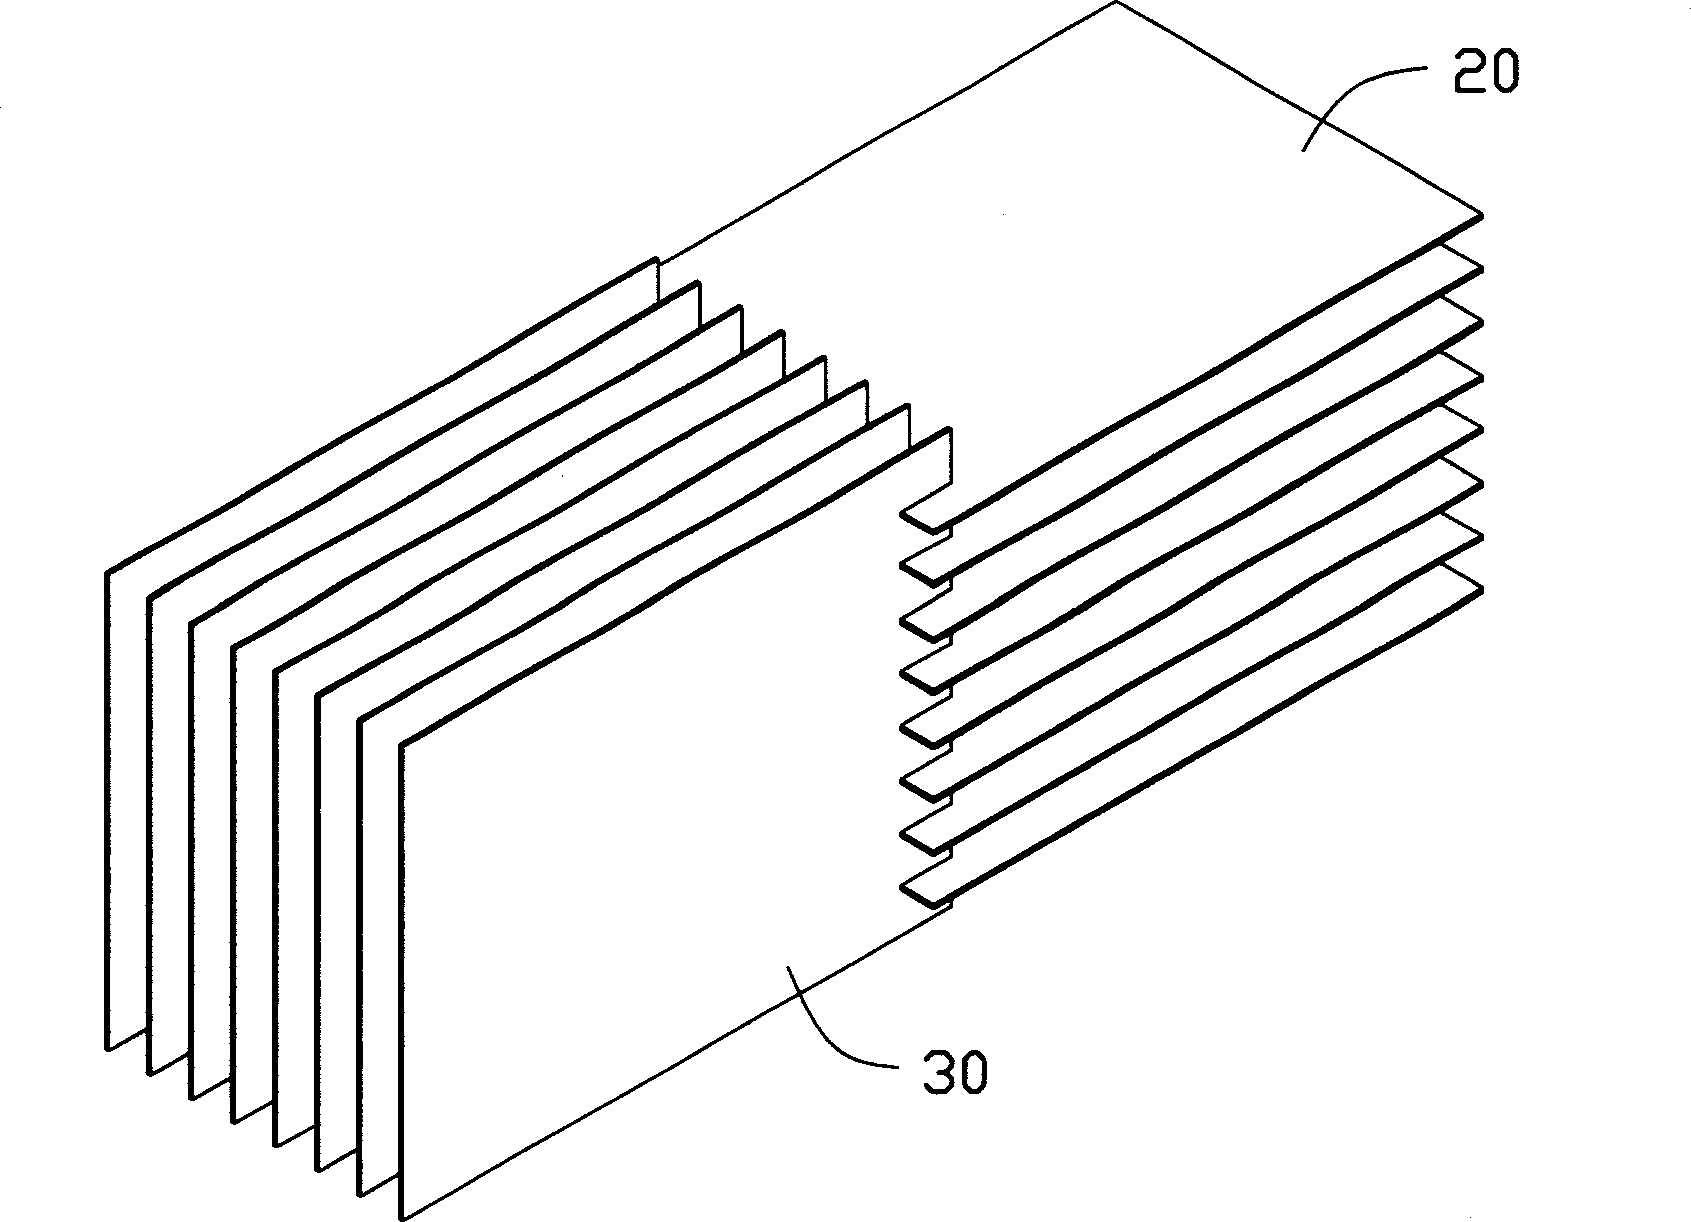 Method for interconnecting multiple printed circuit boards